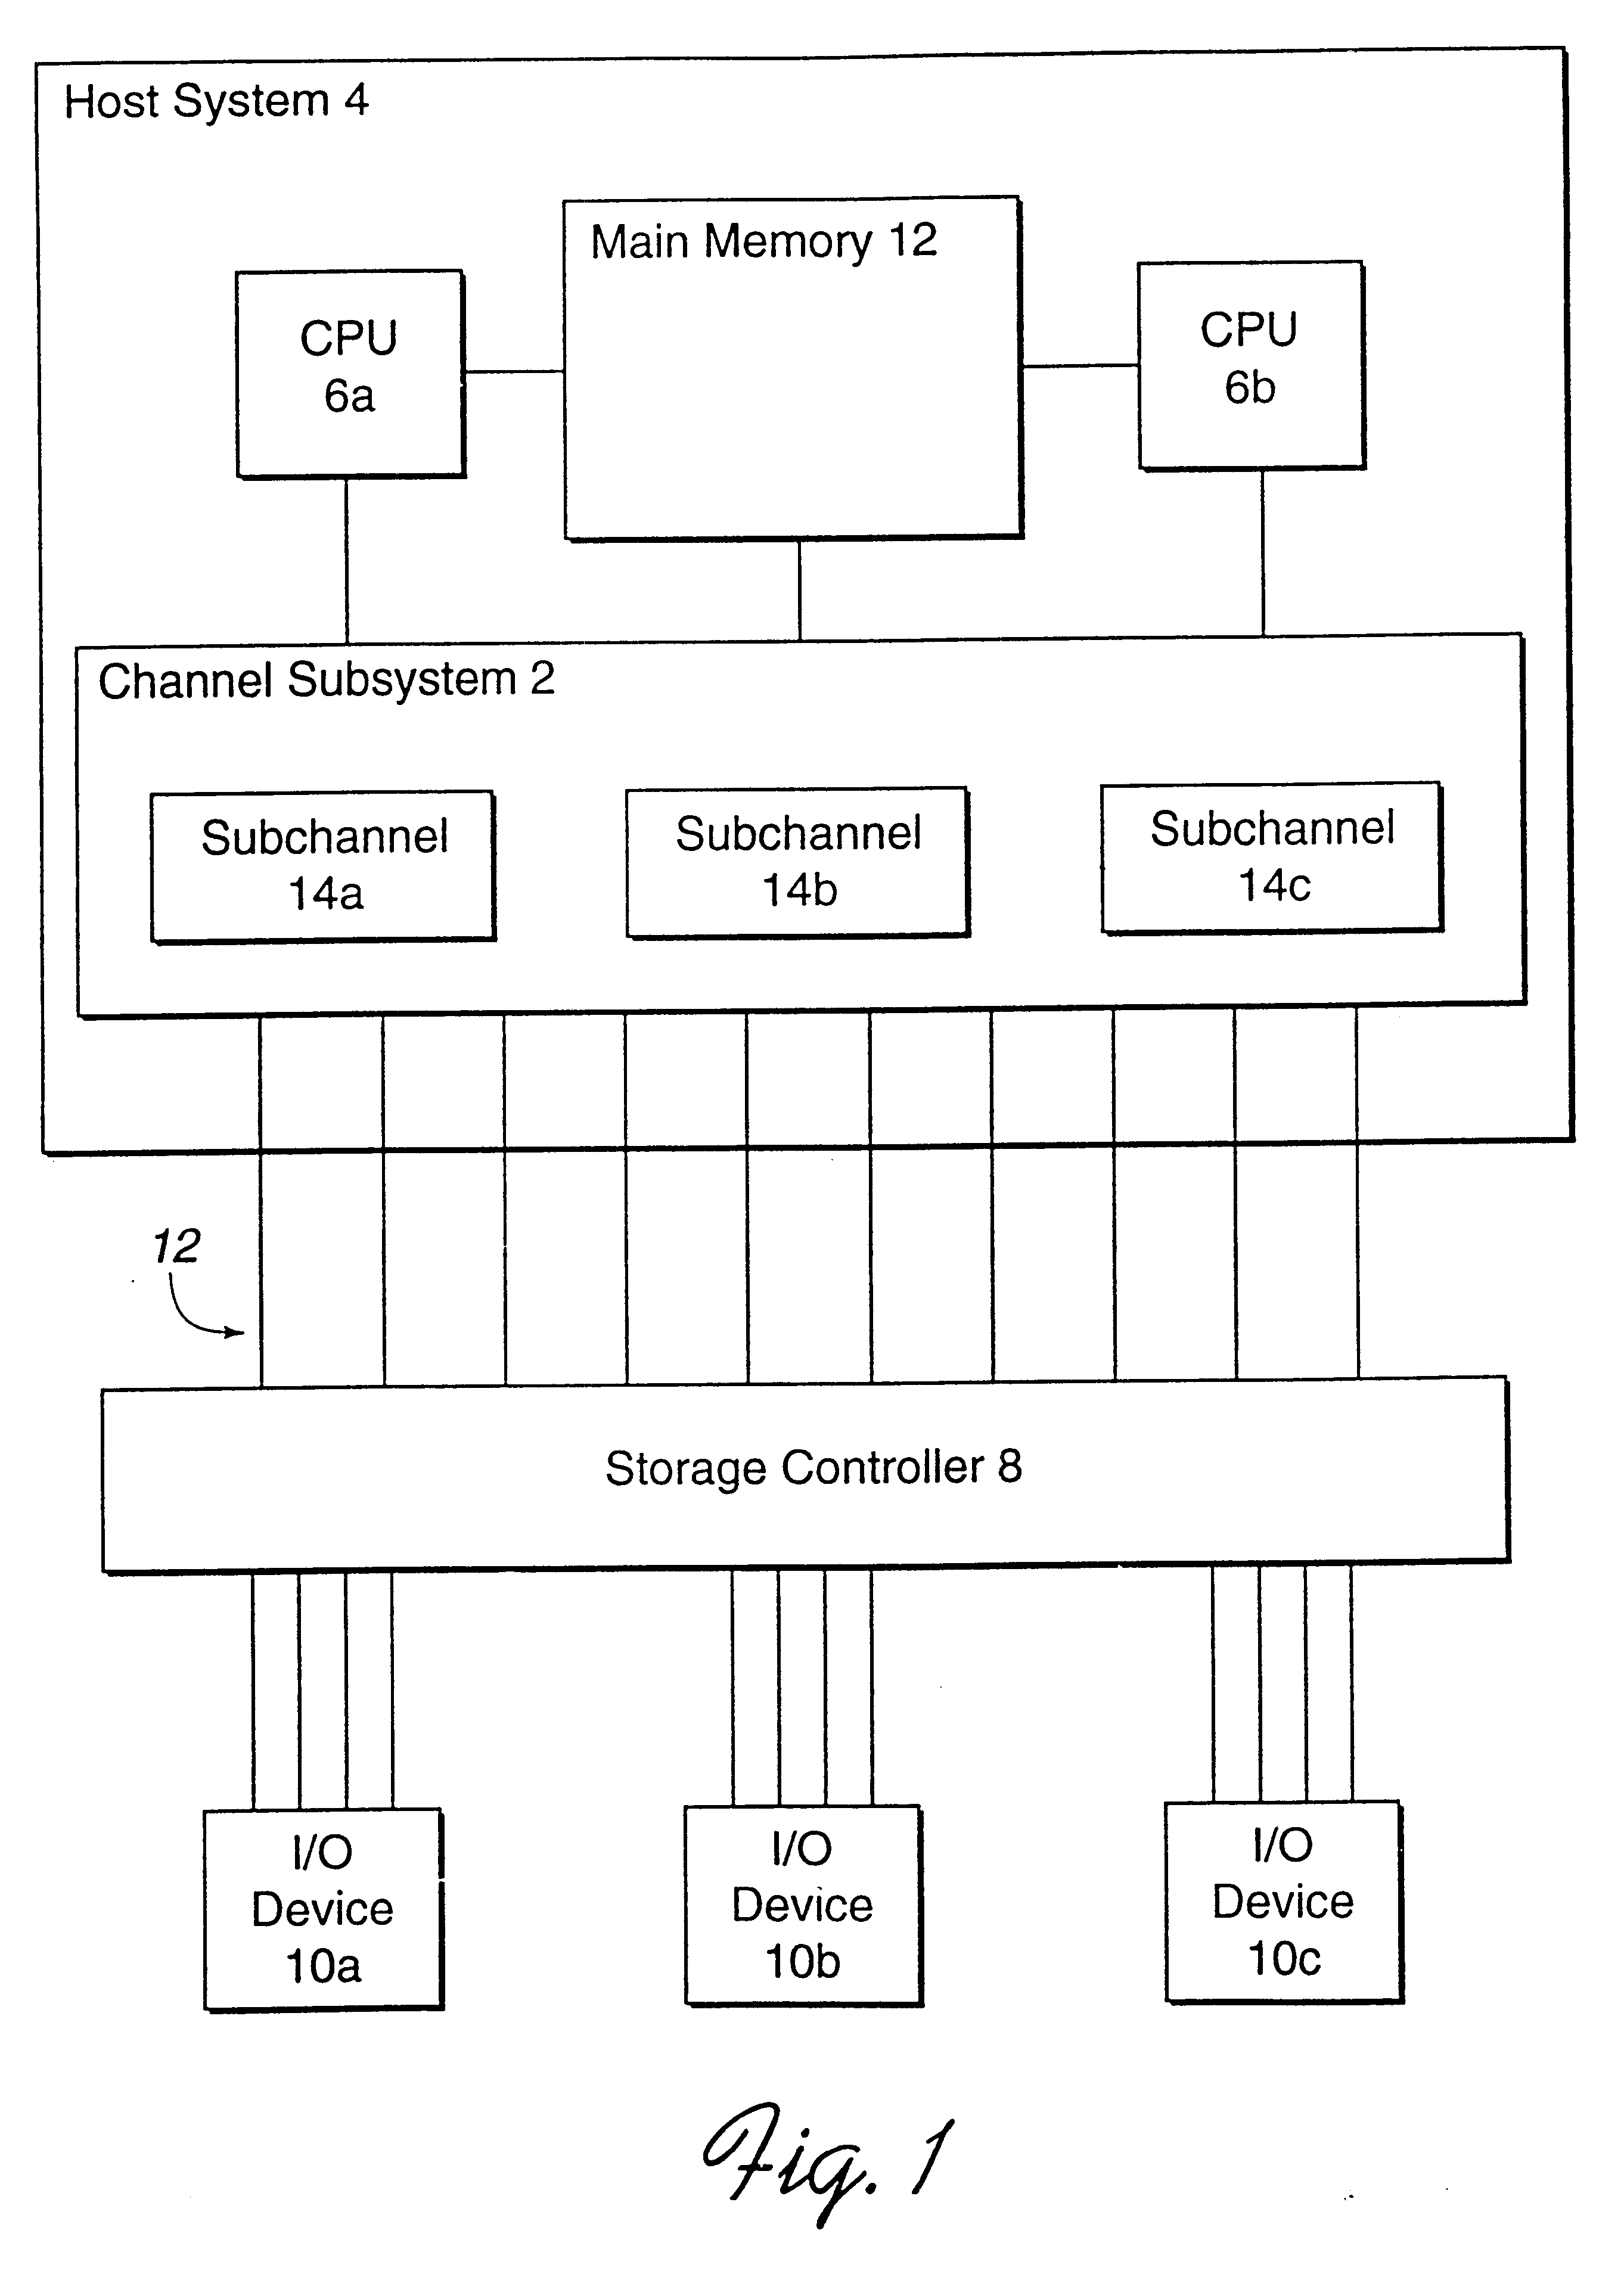 Dynamic management of addresses to an input/output (I/O) device